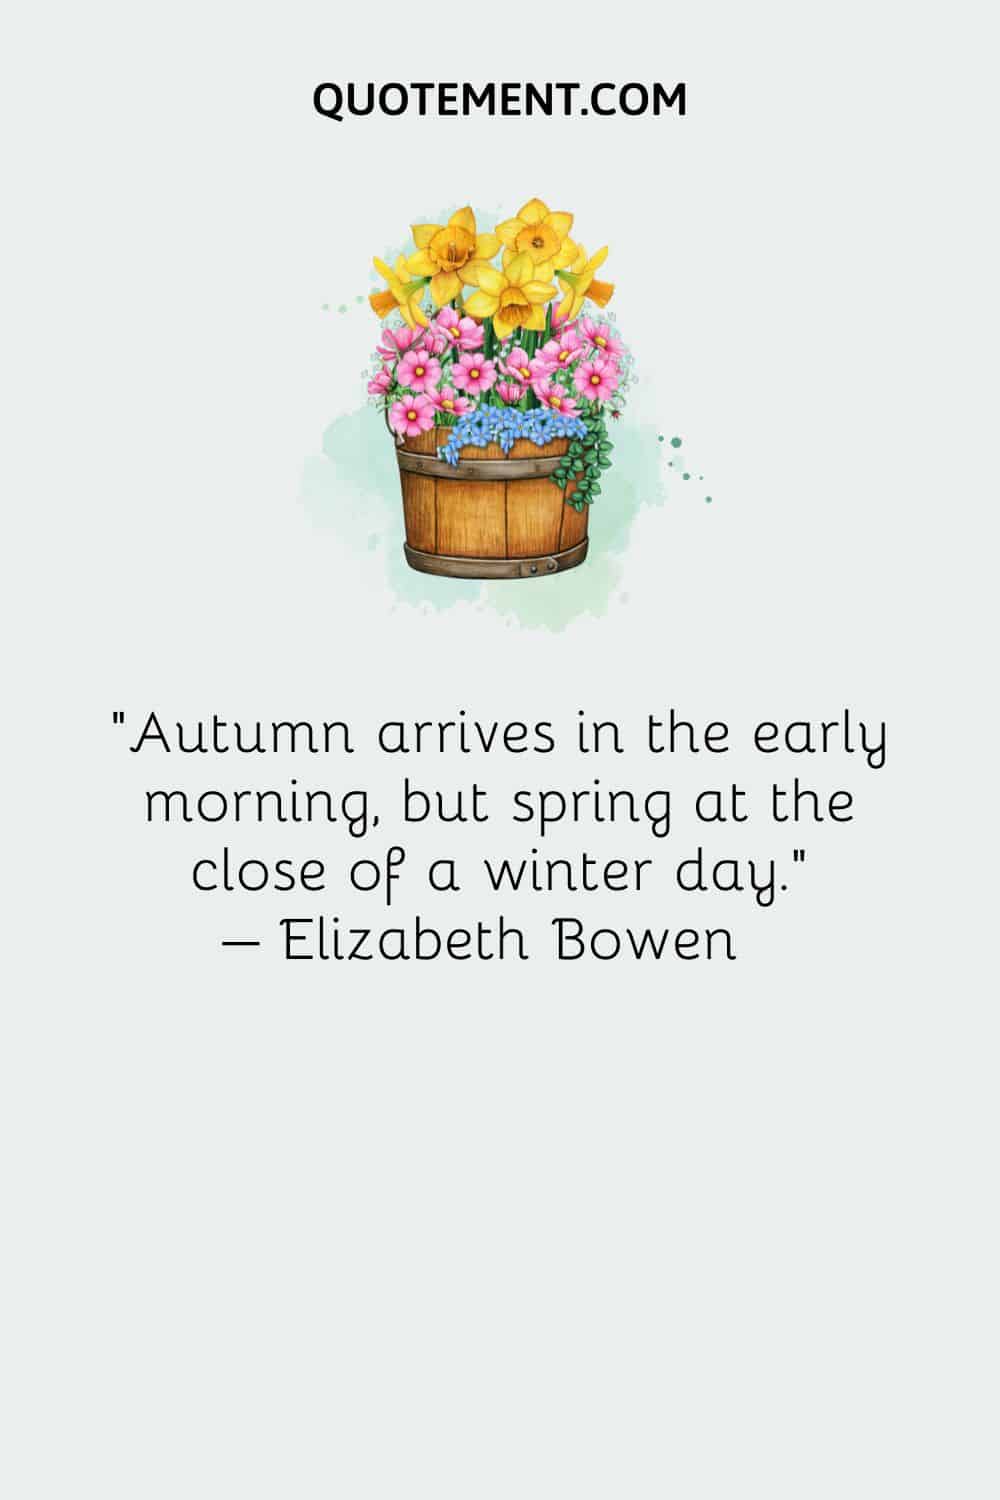 Autumn arrives in the early morning, but spring at the close of a winter day. – Elizabeth Bowen